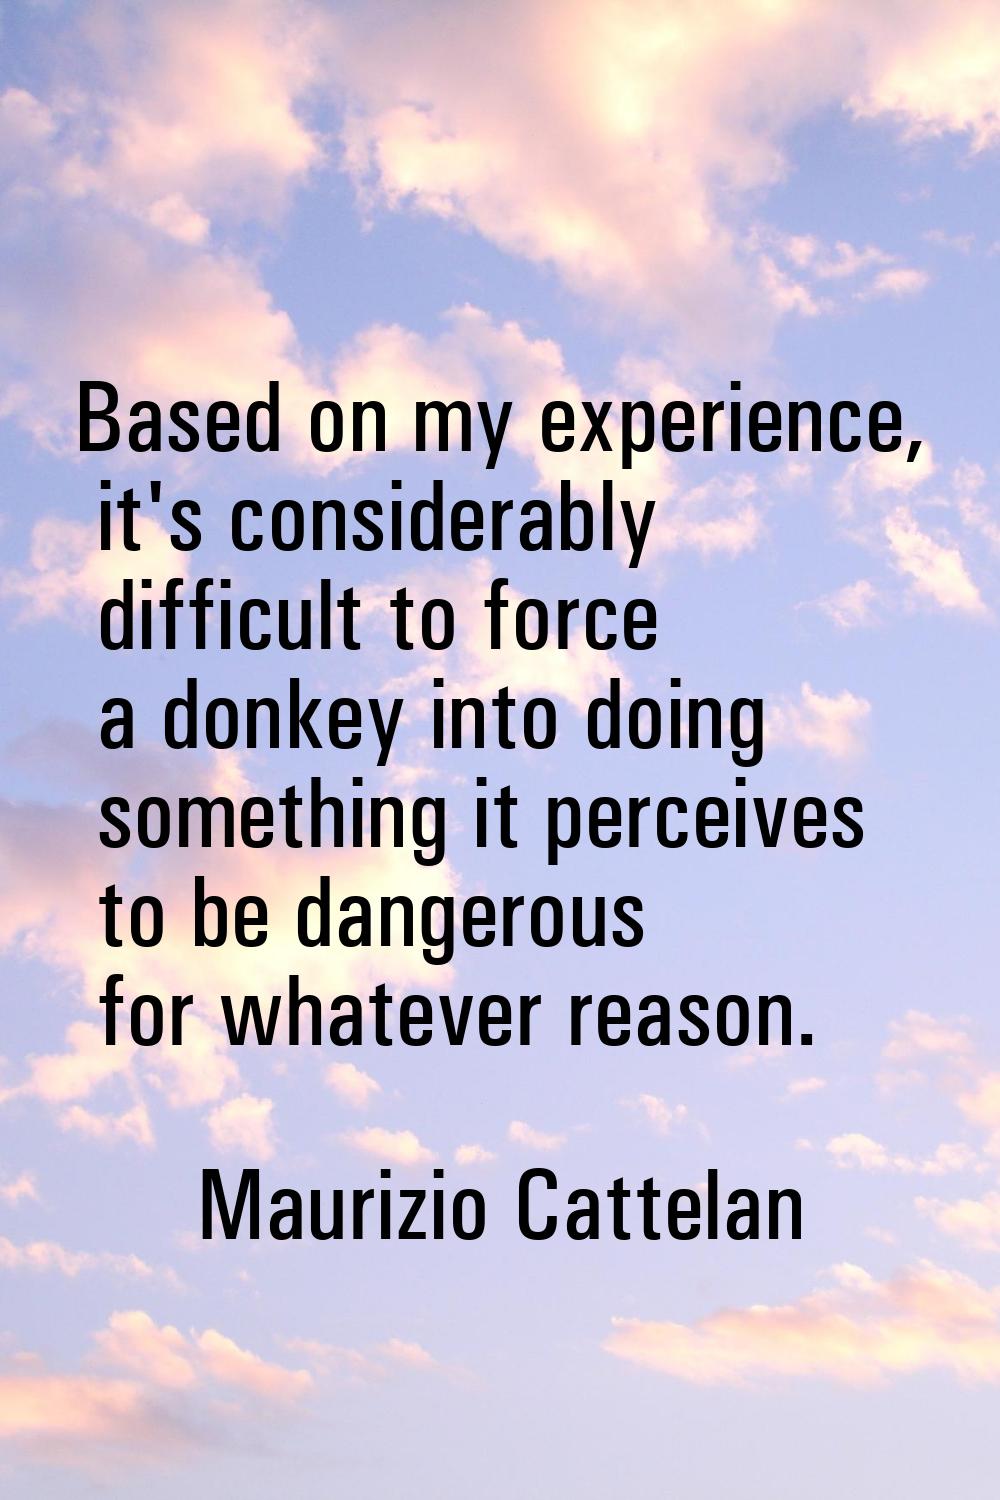 Based on my experience, it's considerably difficult to force a donkey into doing something it perce